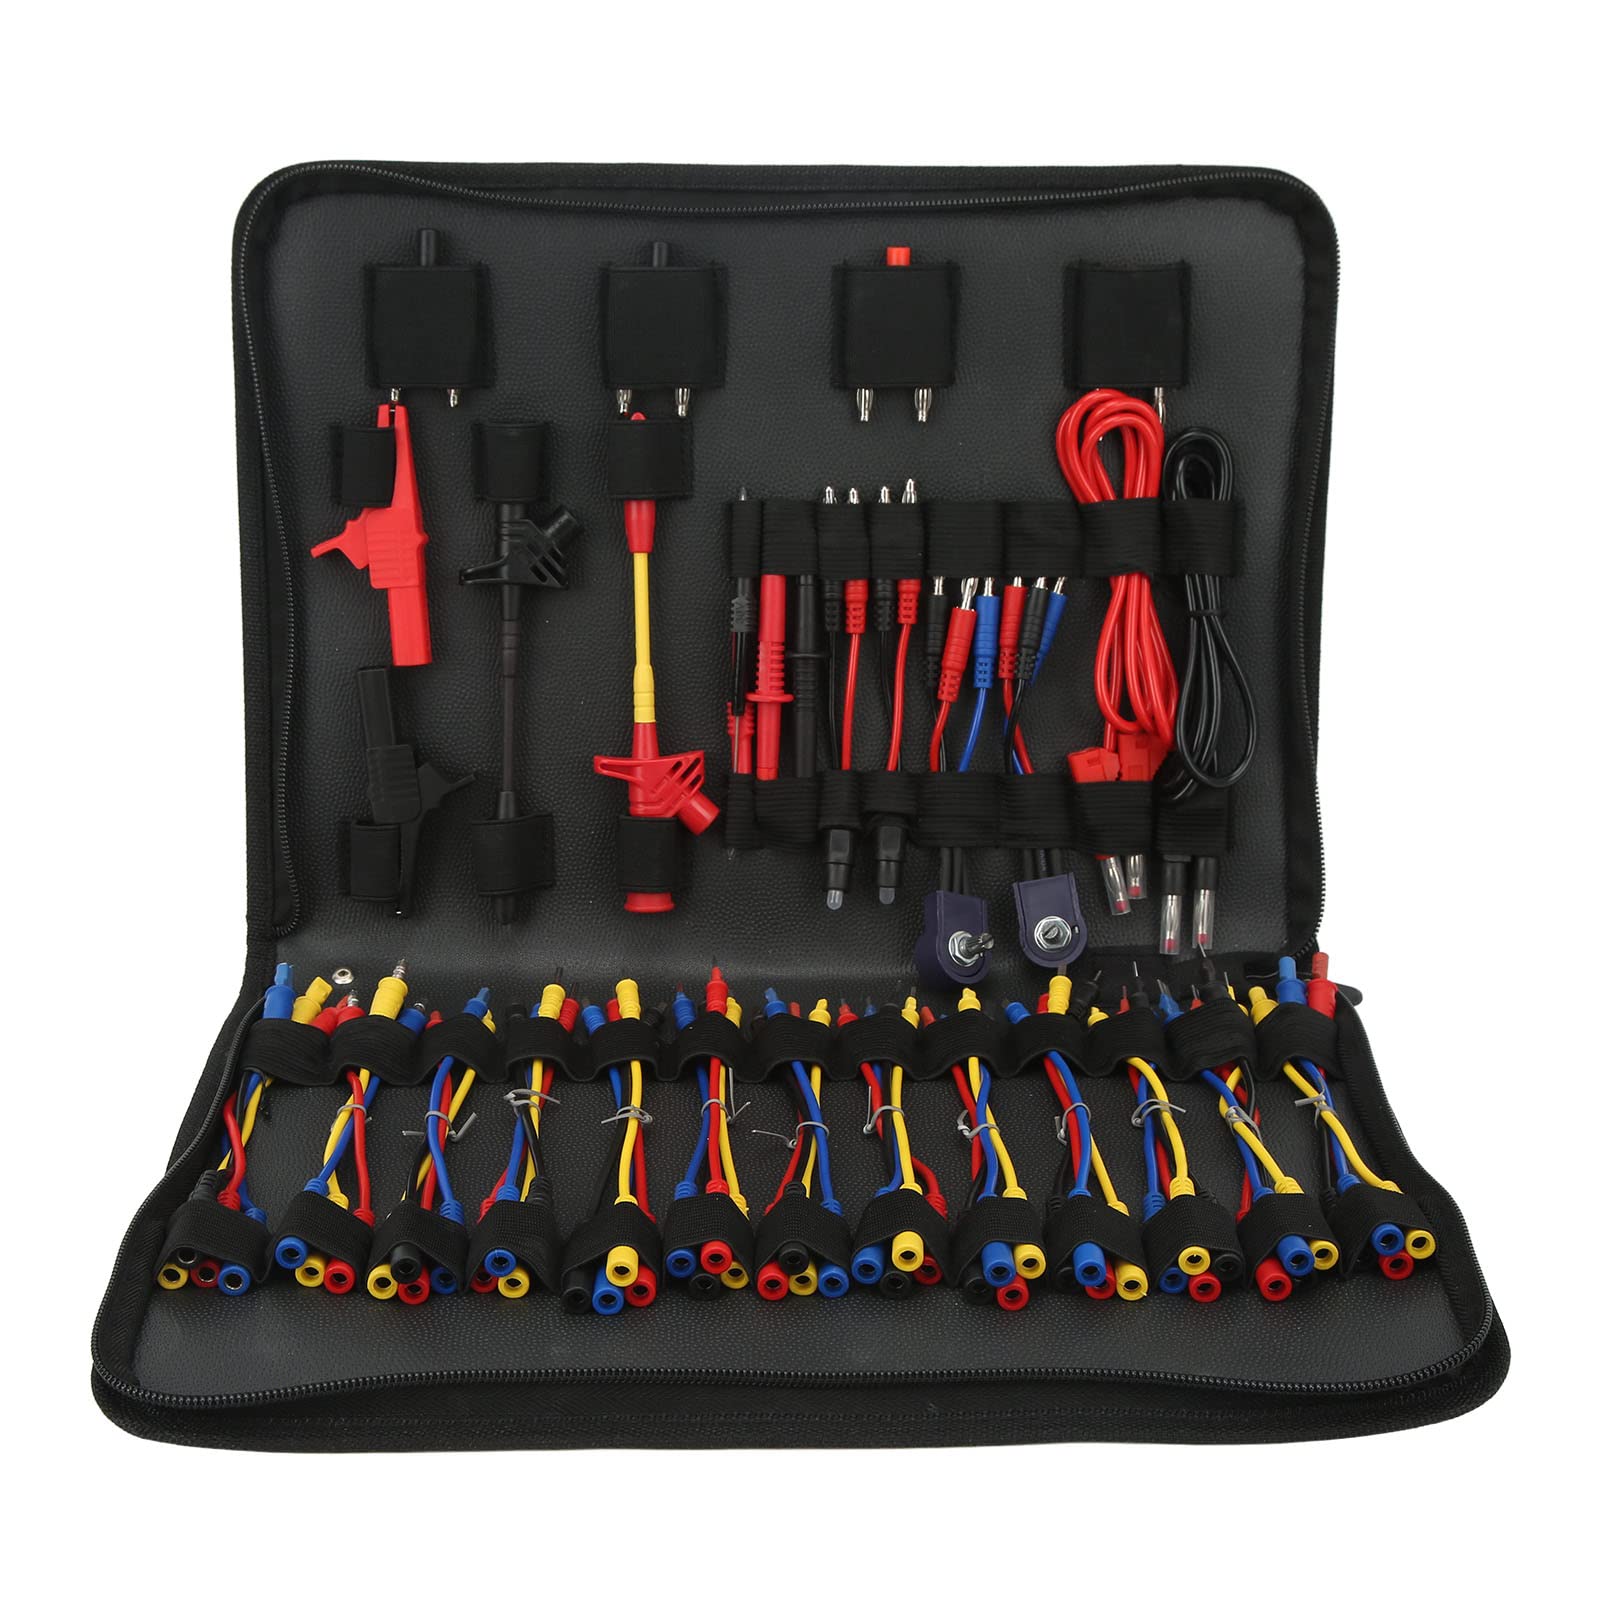 Troubleshooting toolbox or diagnostic tools.